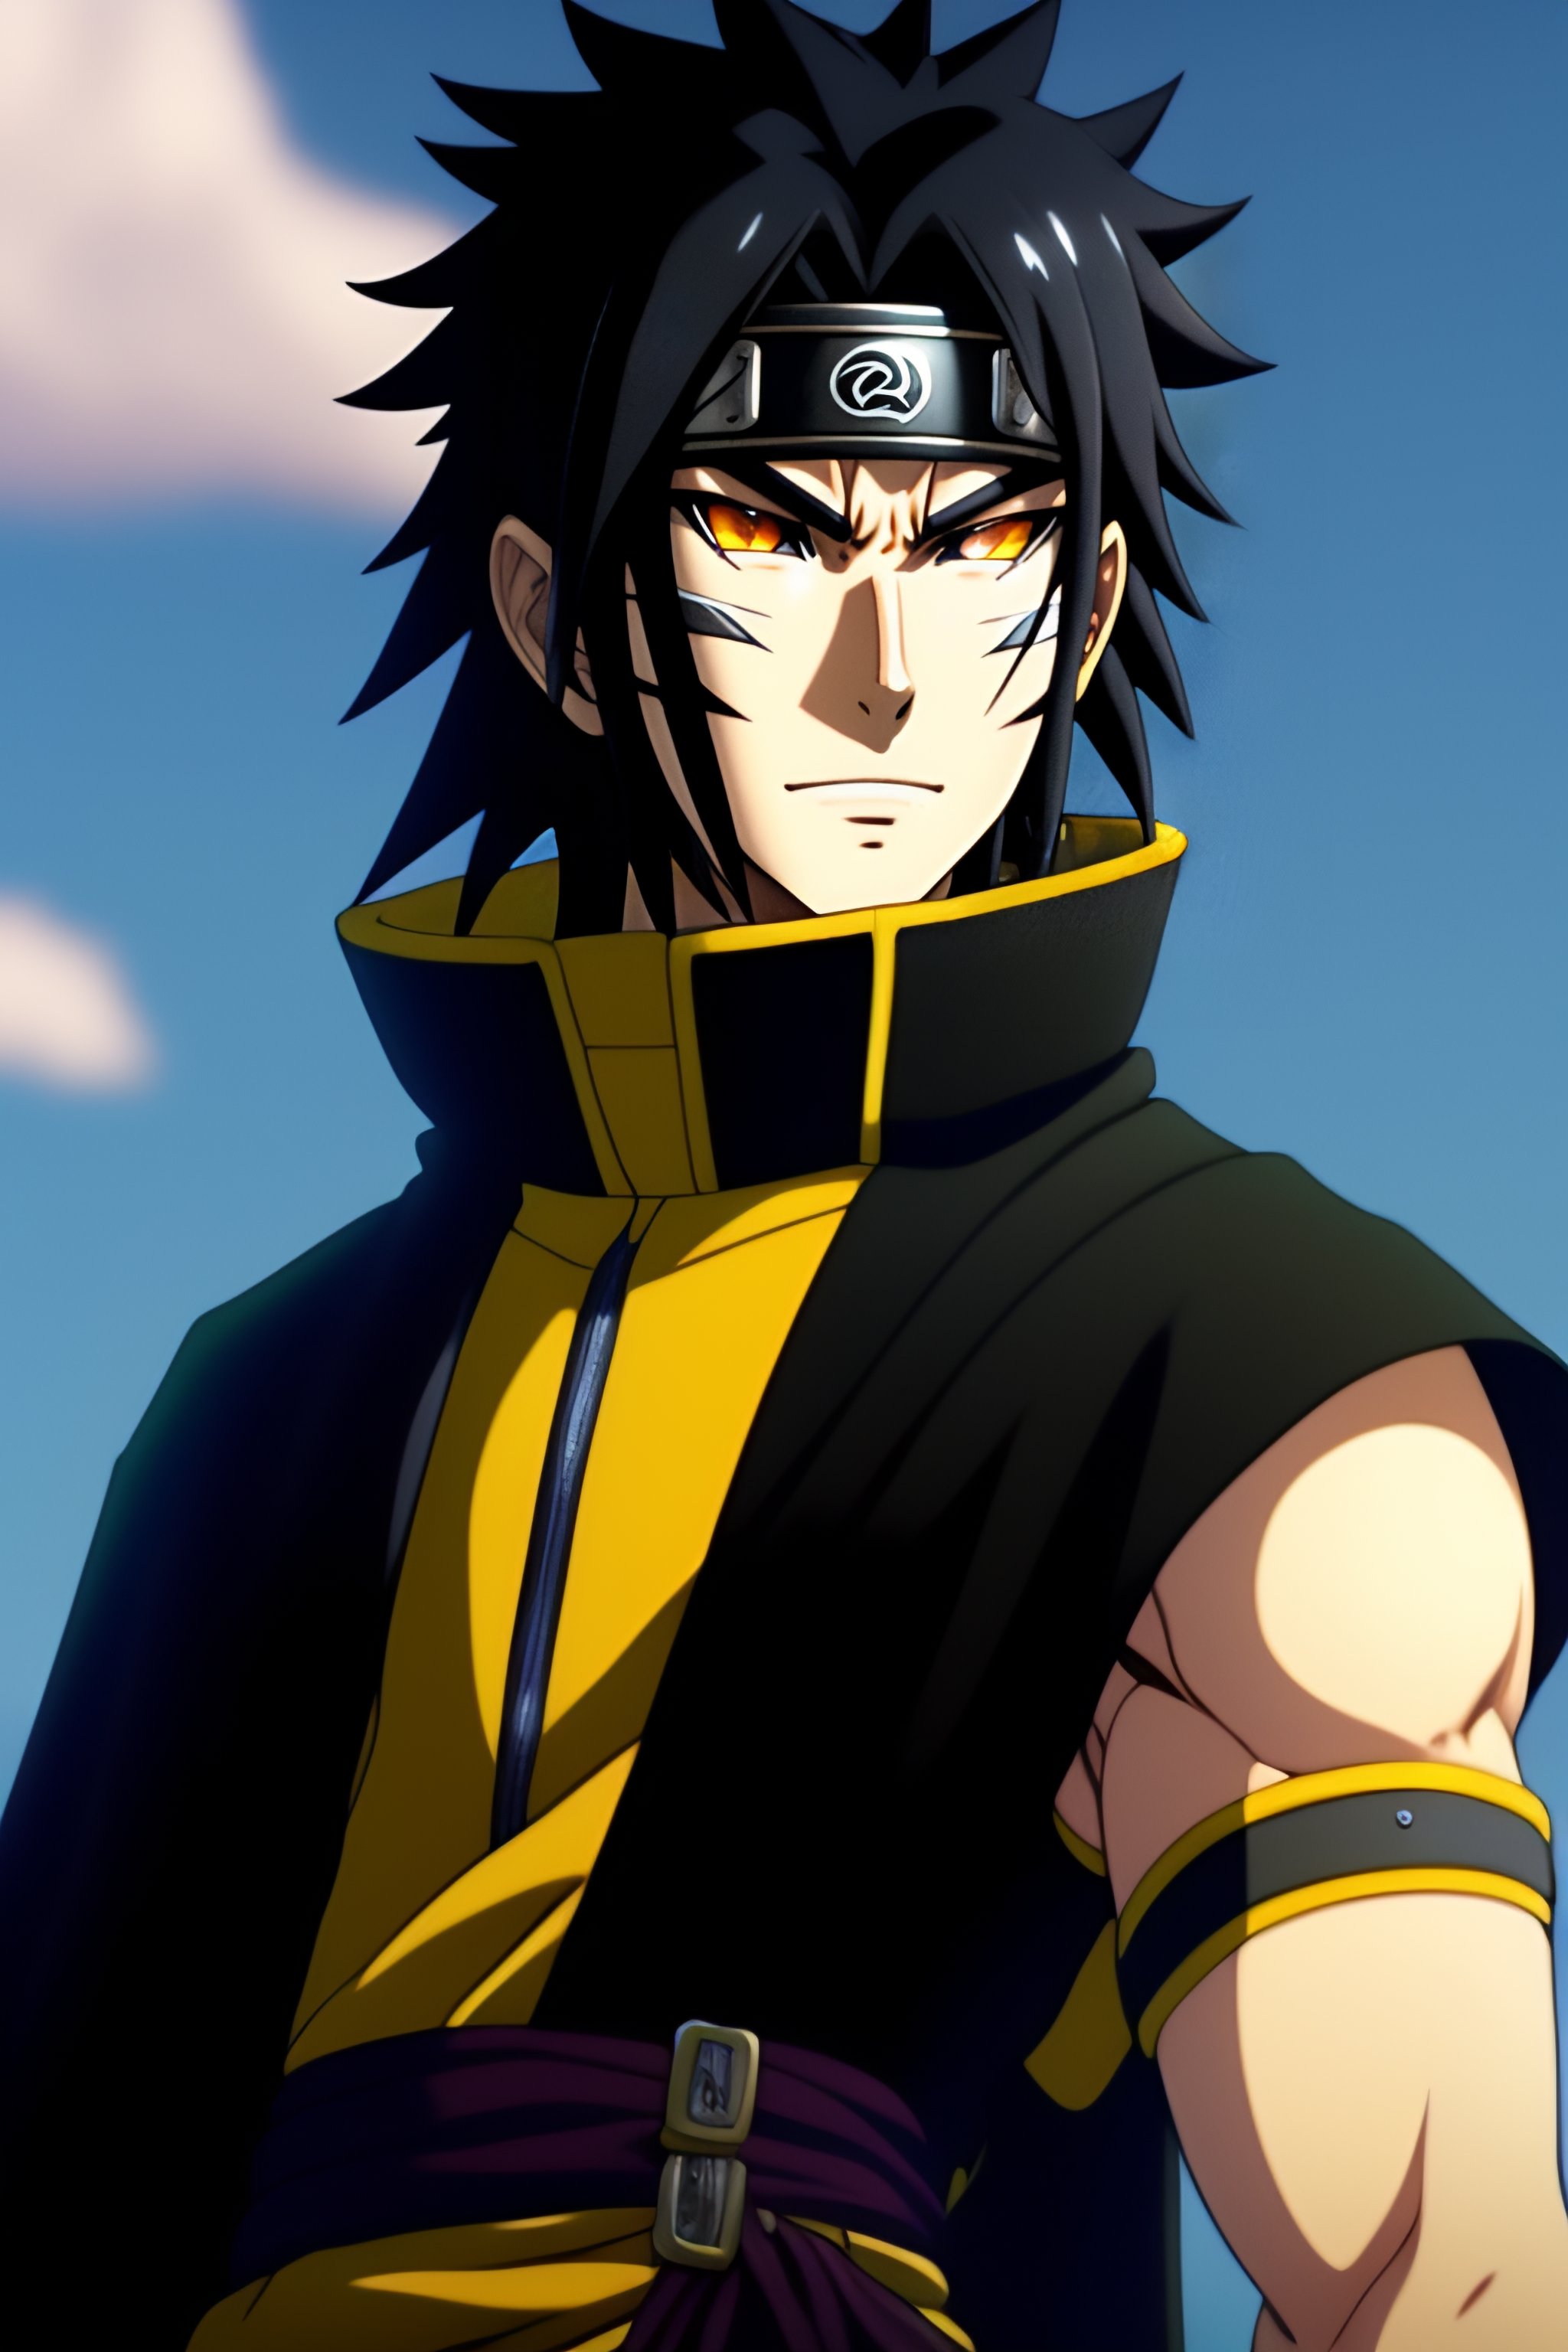 Lexica - Naruto anime character who is tall, with a muscular build and  chiseled features. He has long black hair, which is styled in a wild and  untam...